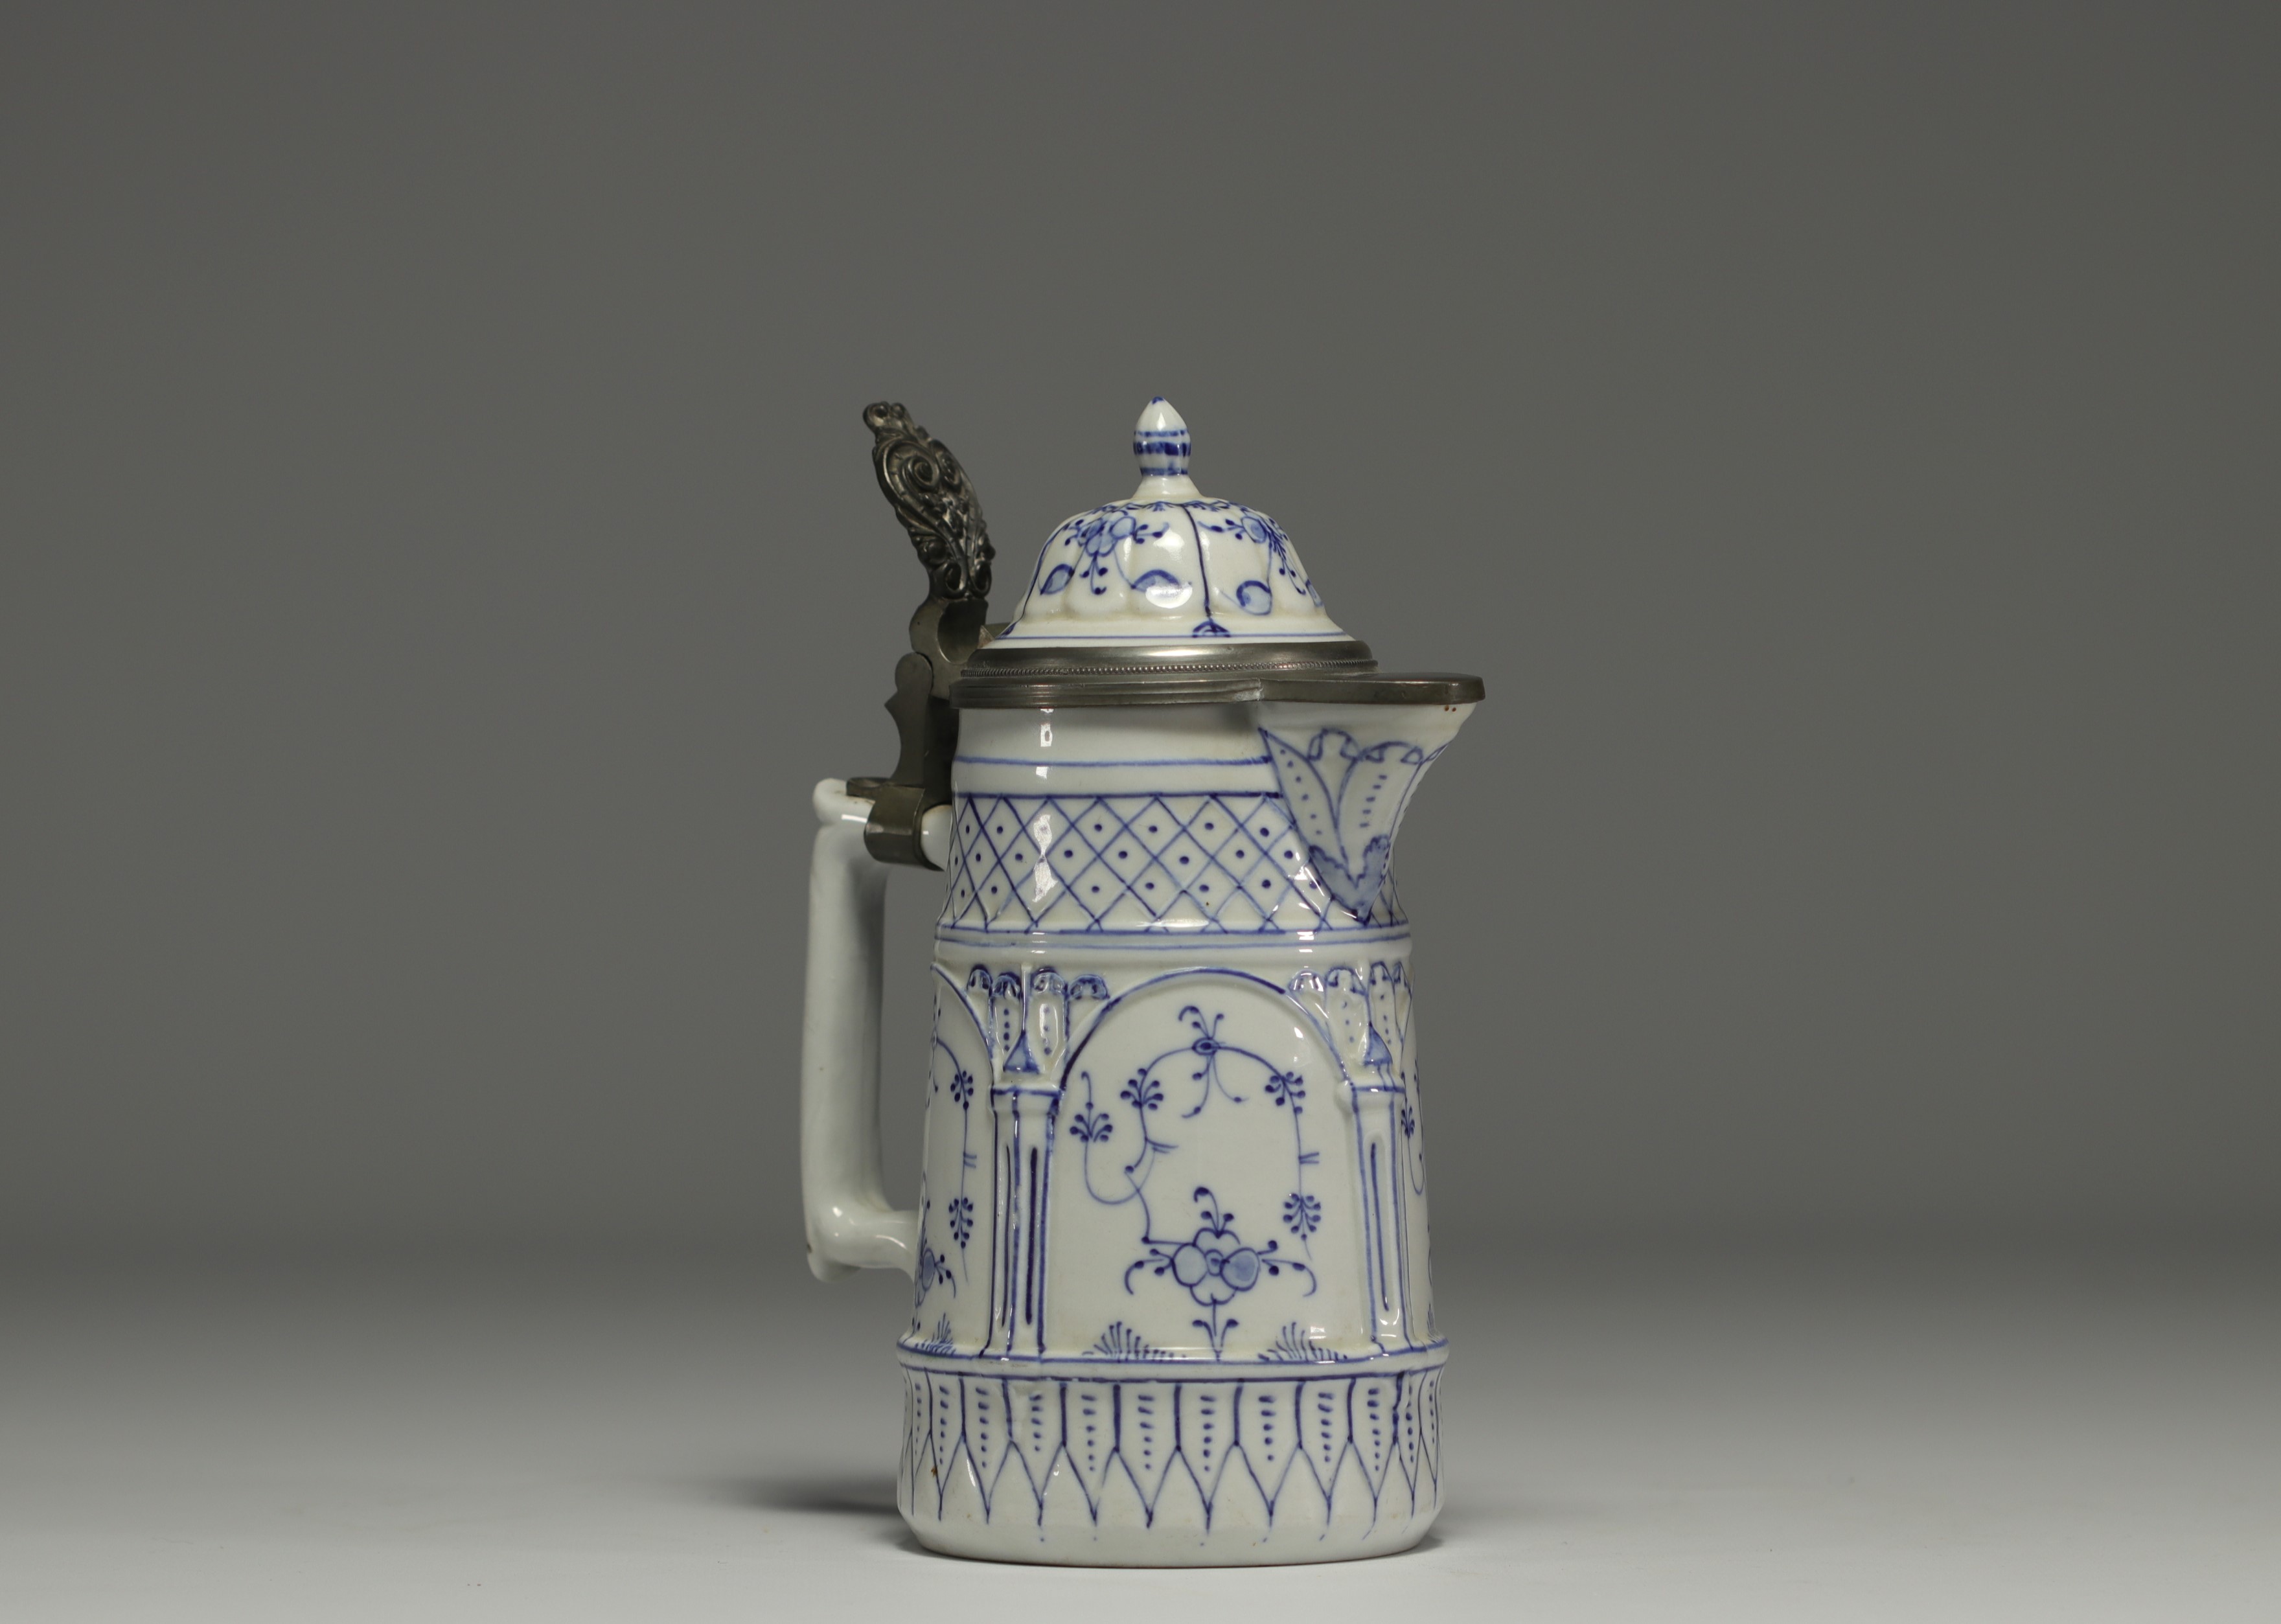 Rauenstein porcelain jug with white and blue decoration, pewter frame, 19th century.